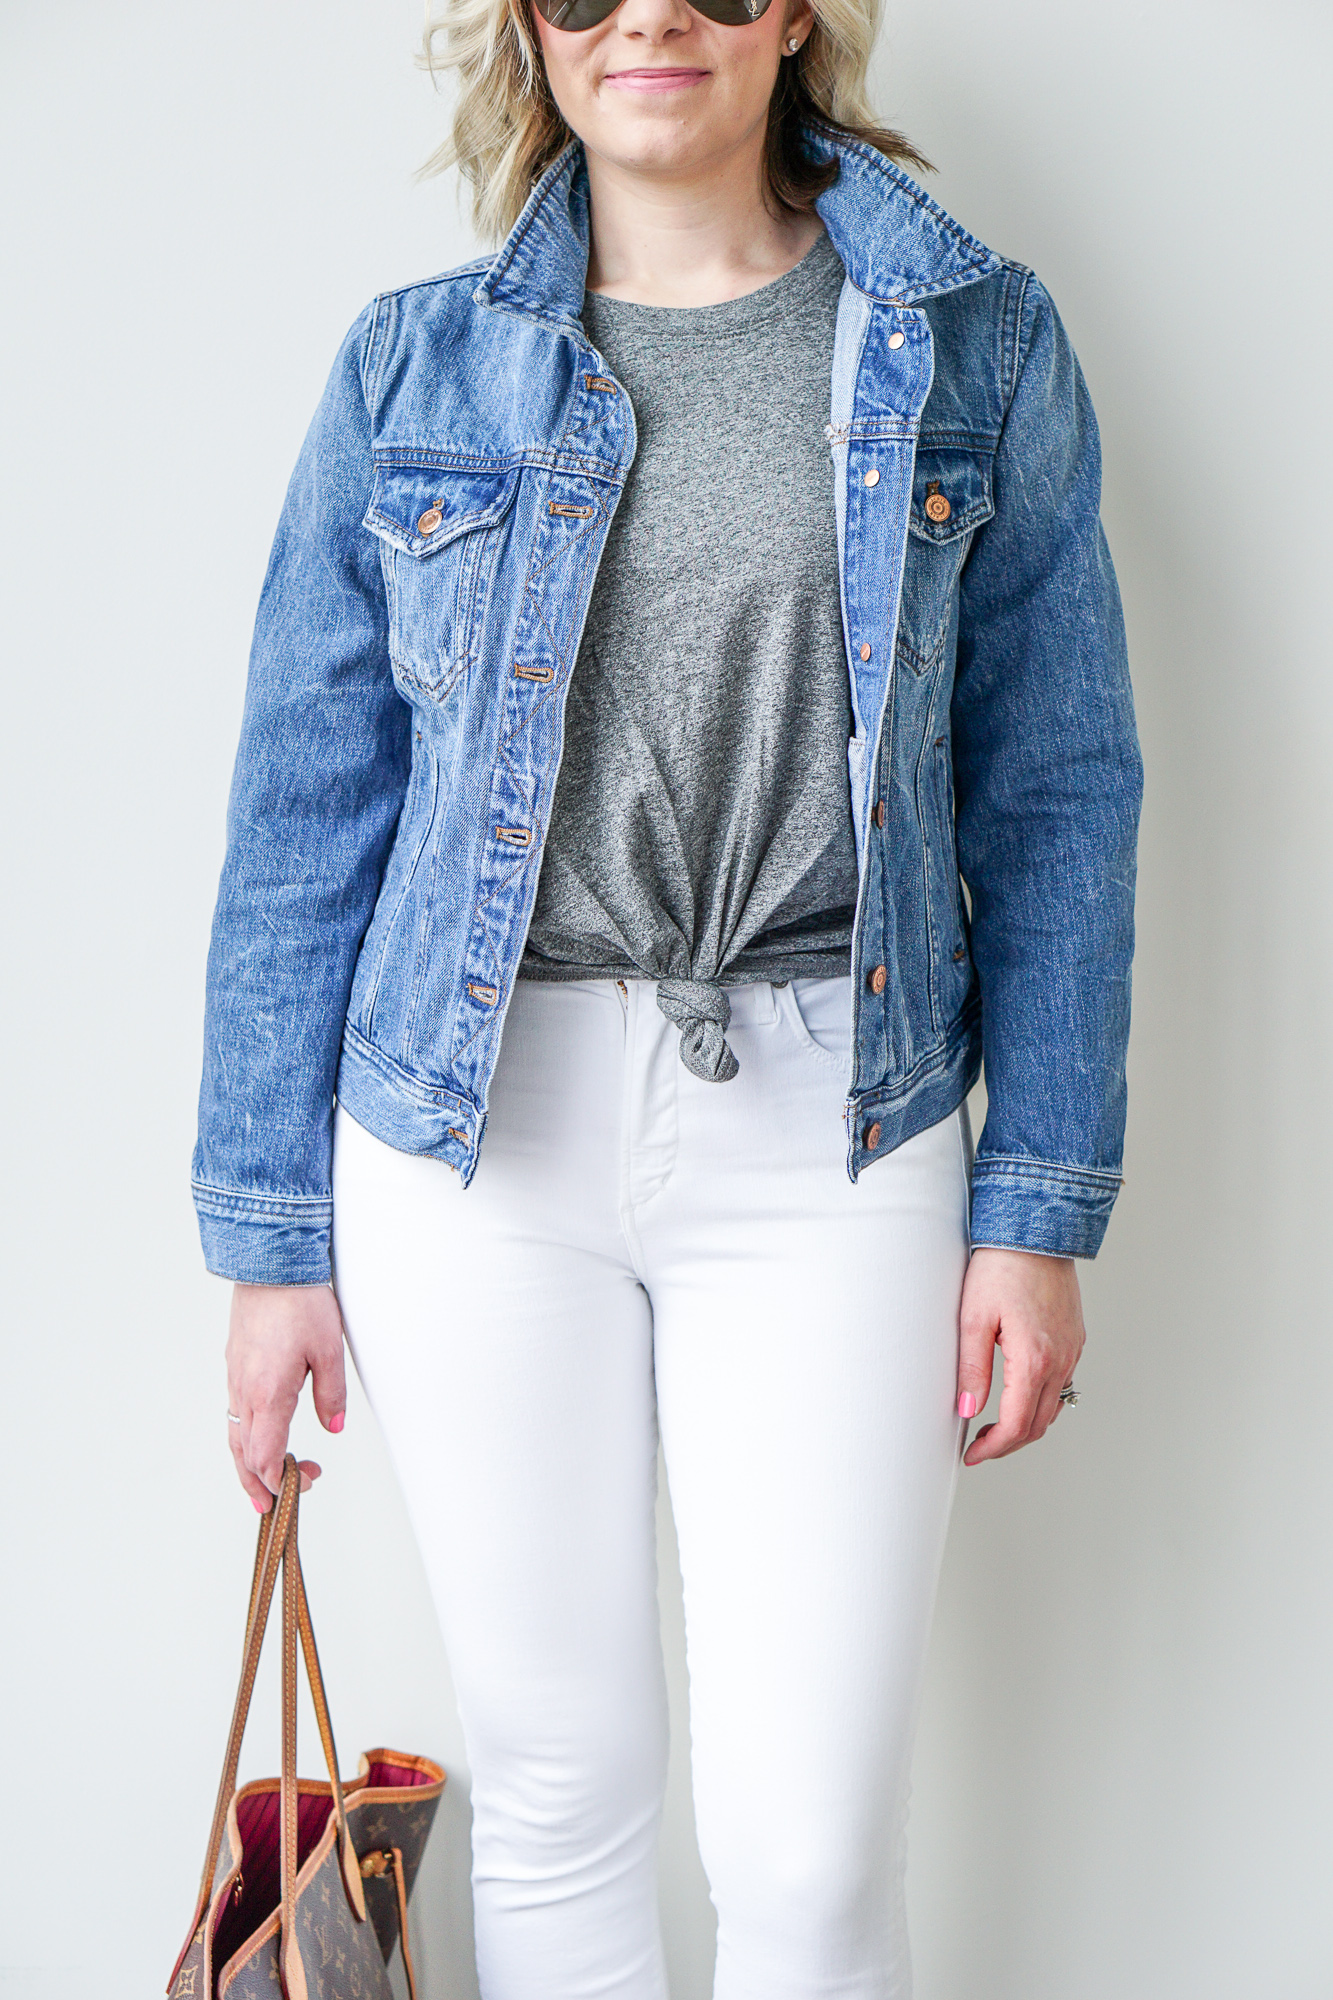 jean jacket and grey knotted t-shirt